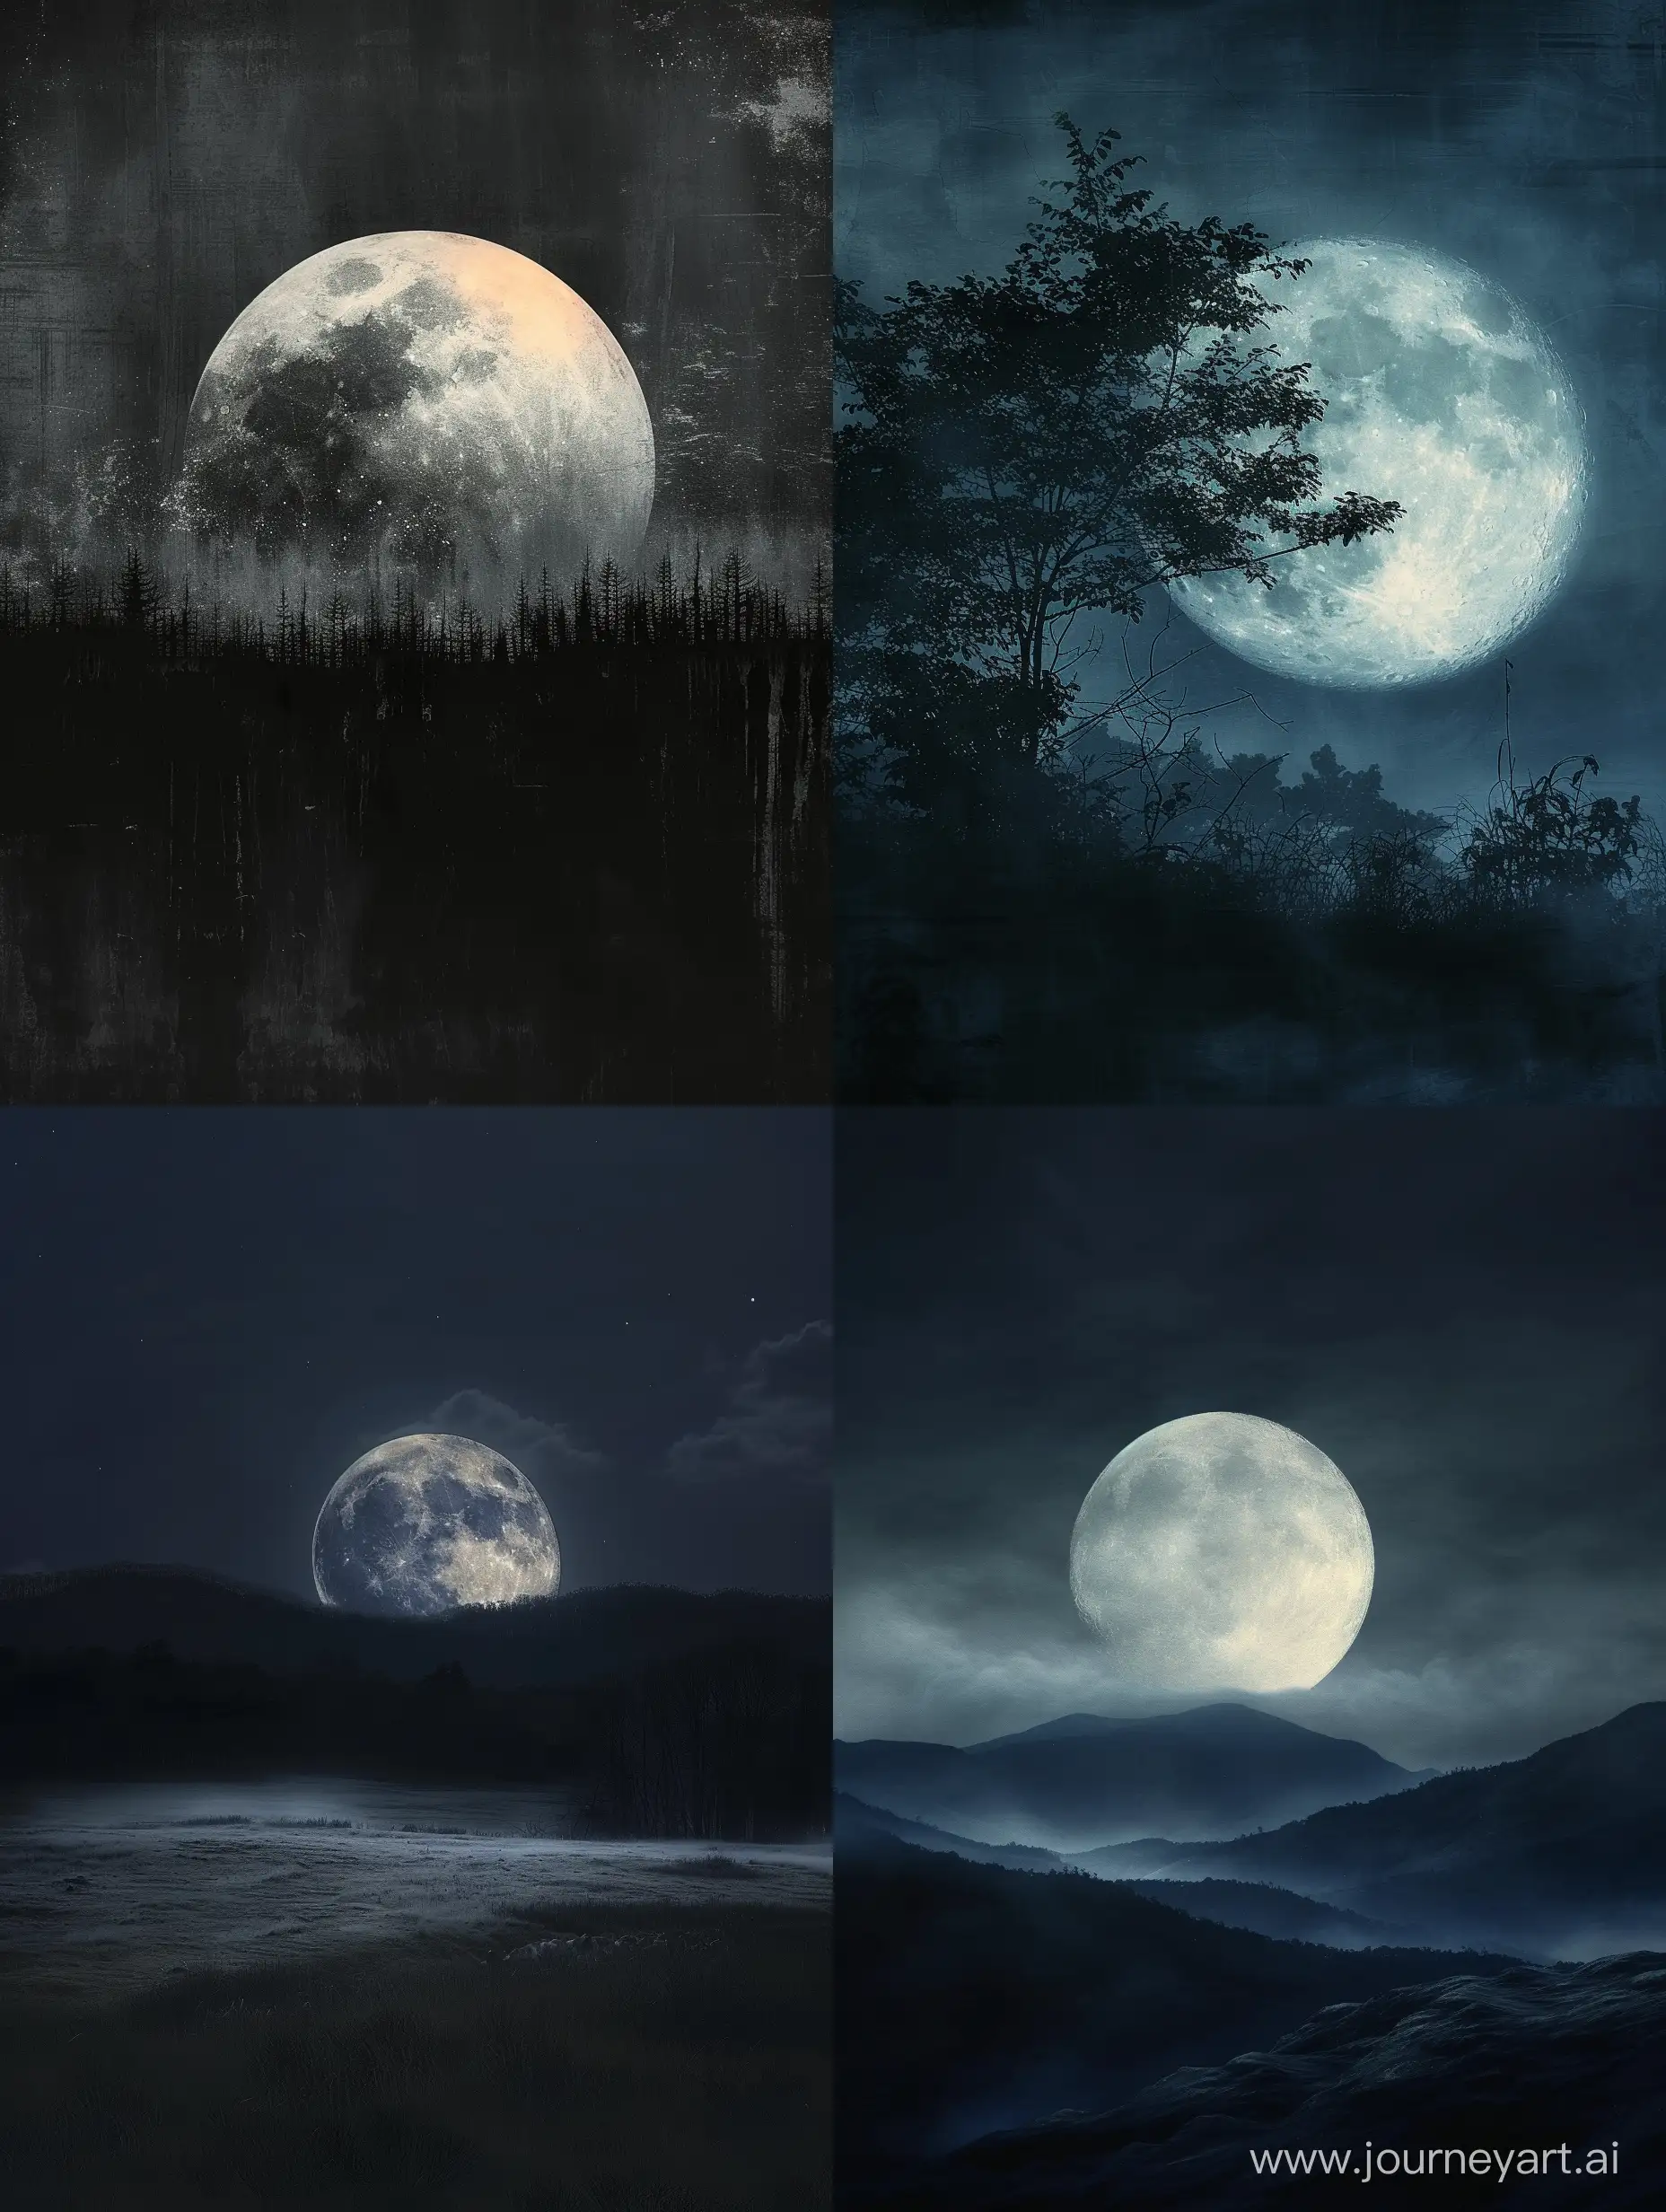 A night landscape where a full moon is obscured by subtle shadows.